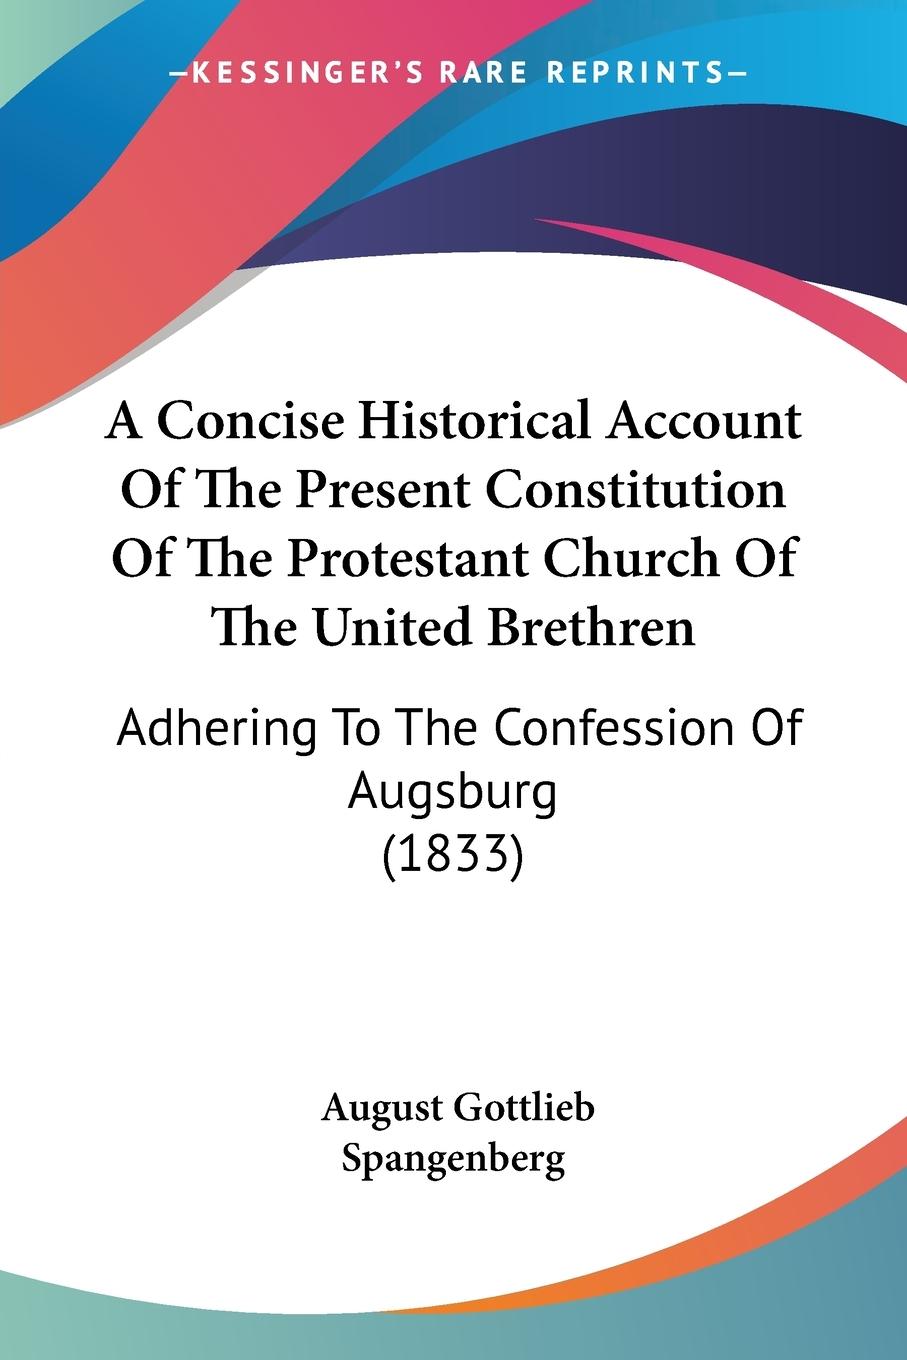 A Concise Historical Account Of The Present Constitution Of The Protestant Church Of The United Brethren - Spangenberg, August Gottlieb